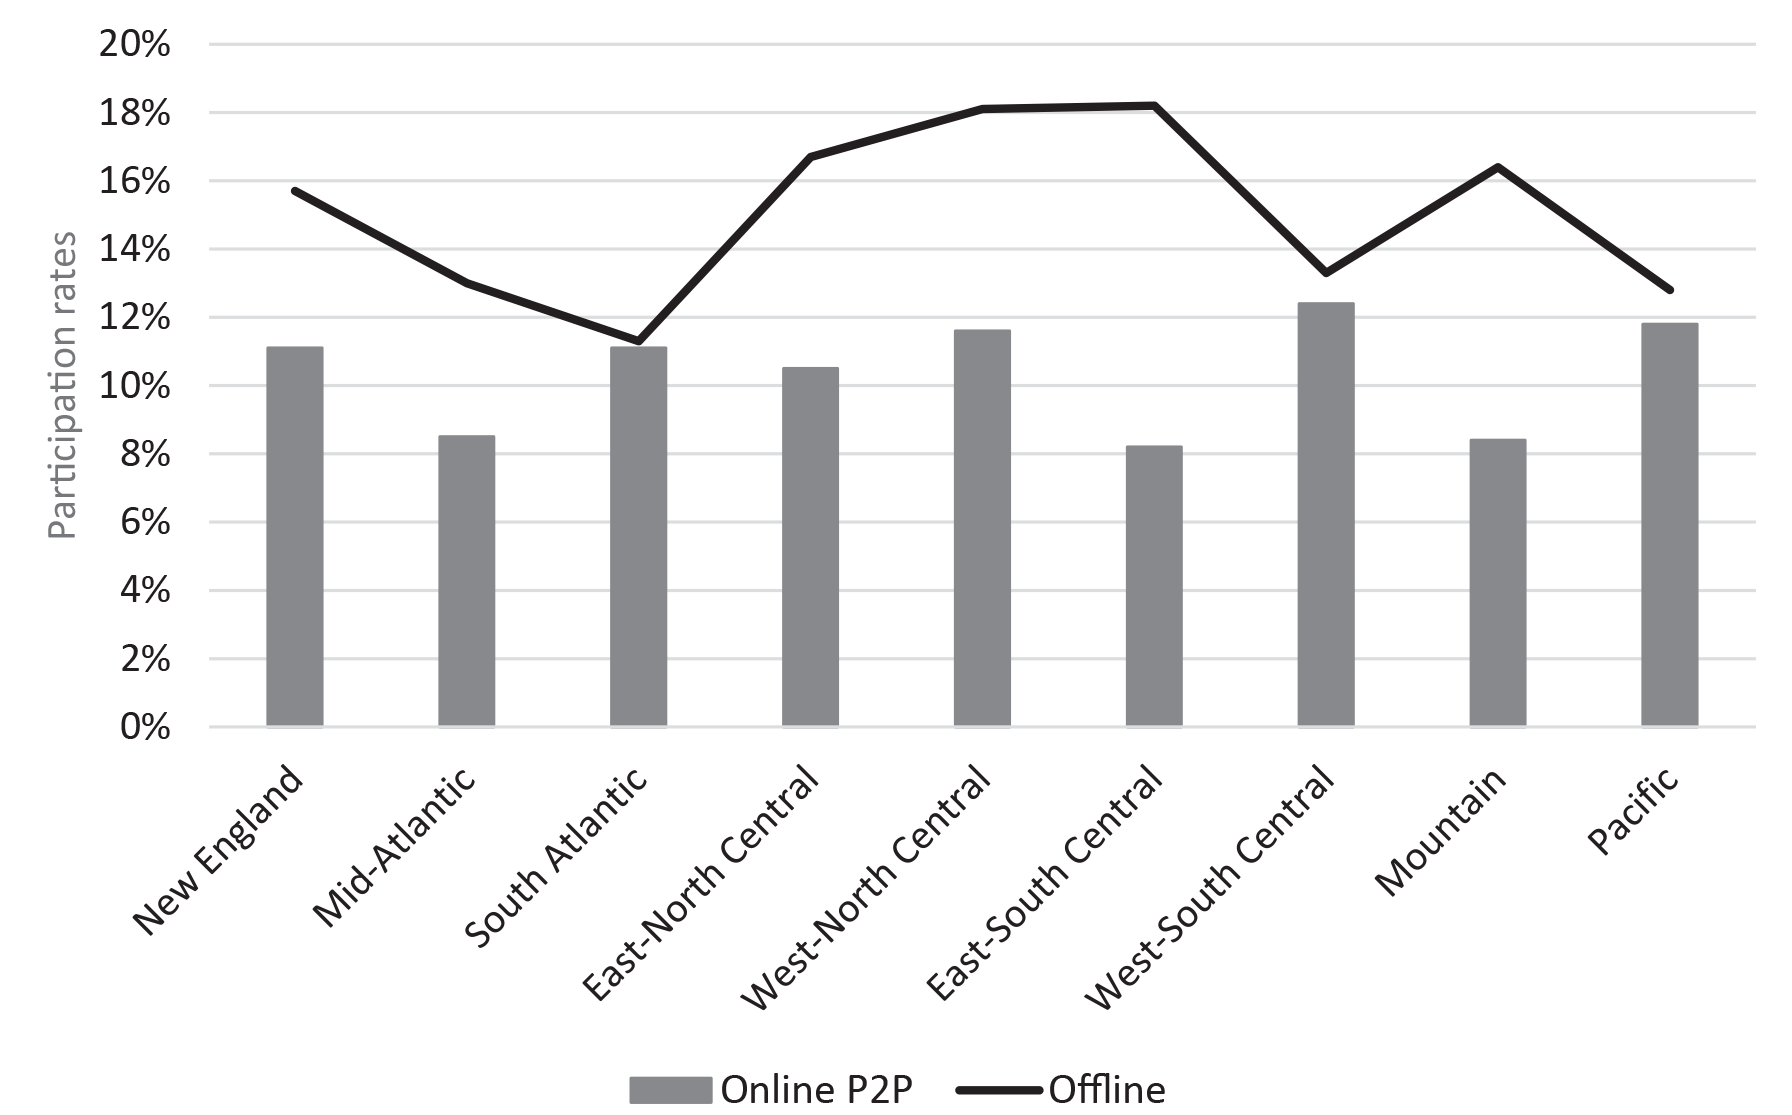 Figure 1: Incidence of online P2P and offline alternative work, by Census Division. See accessible link for data description.